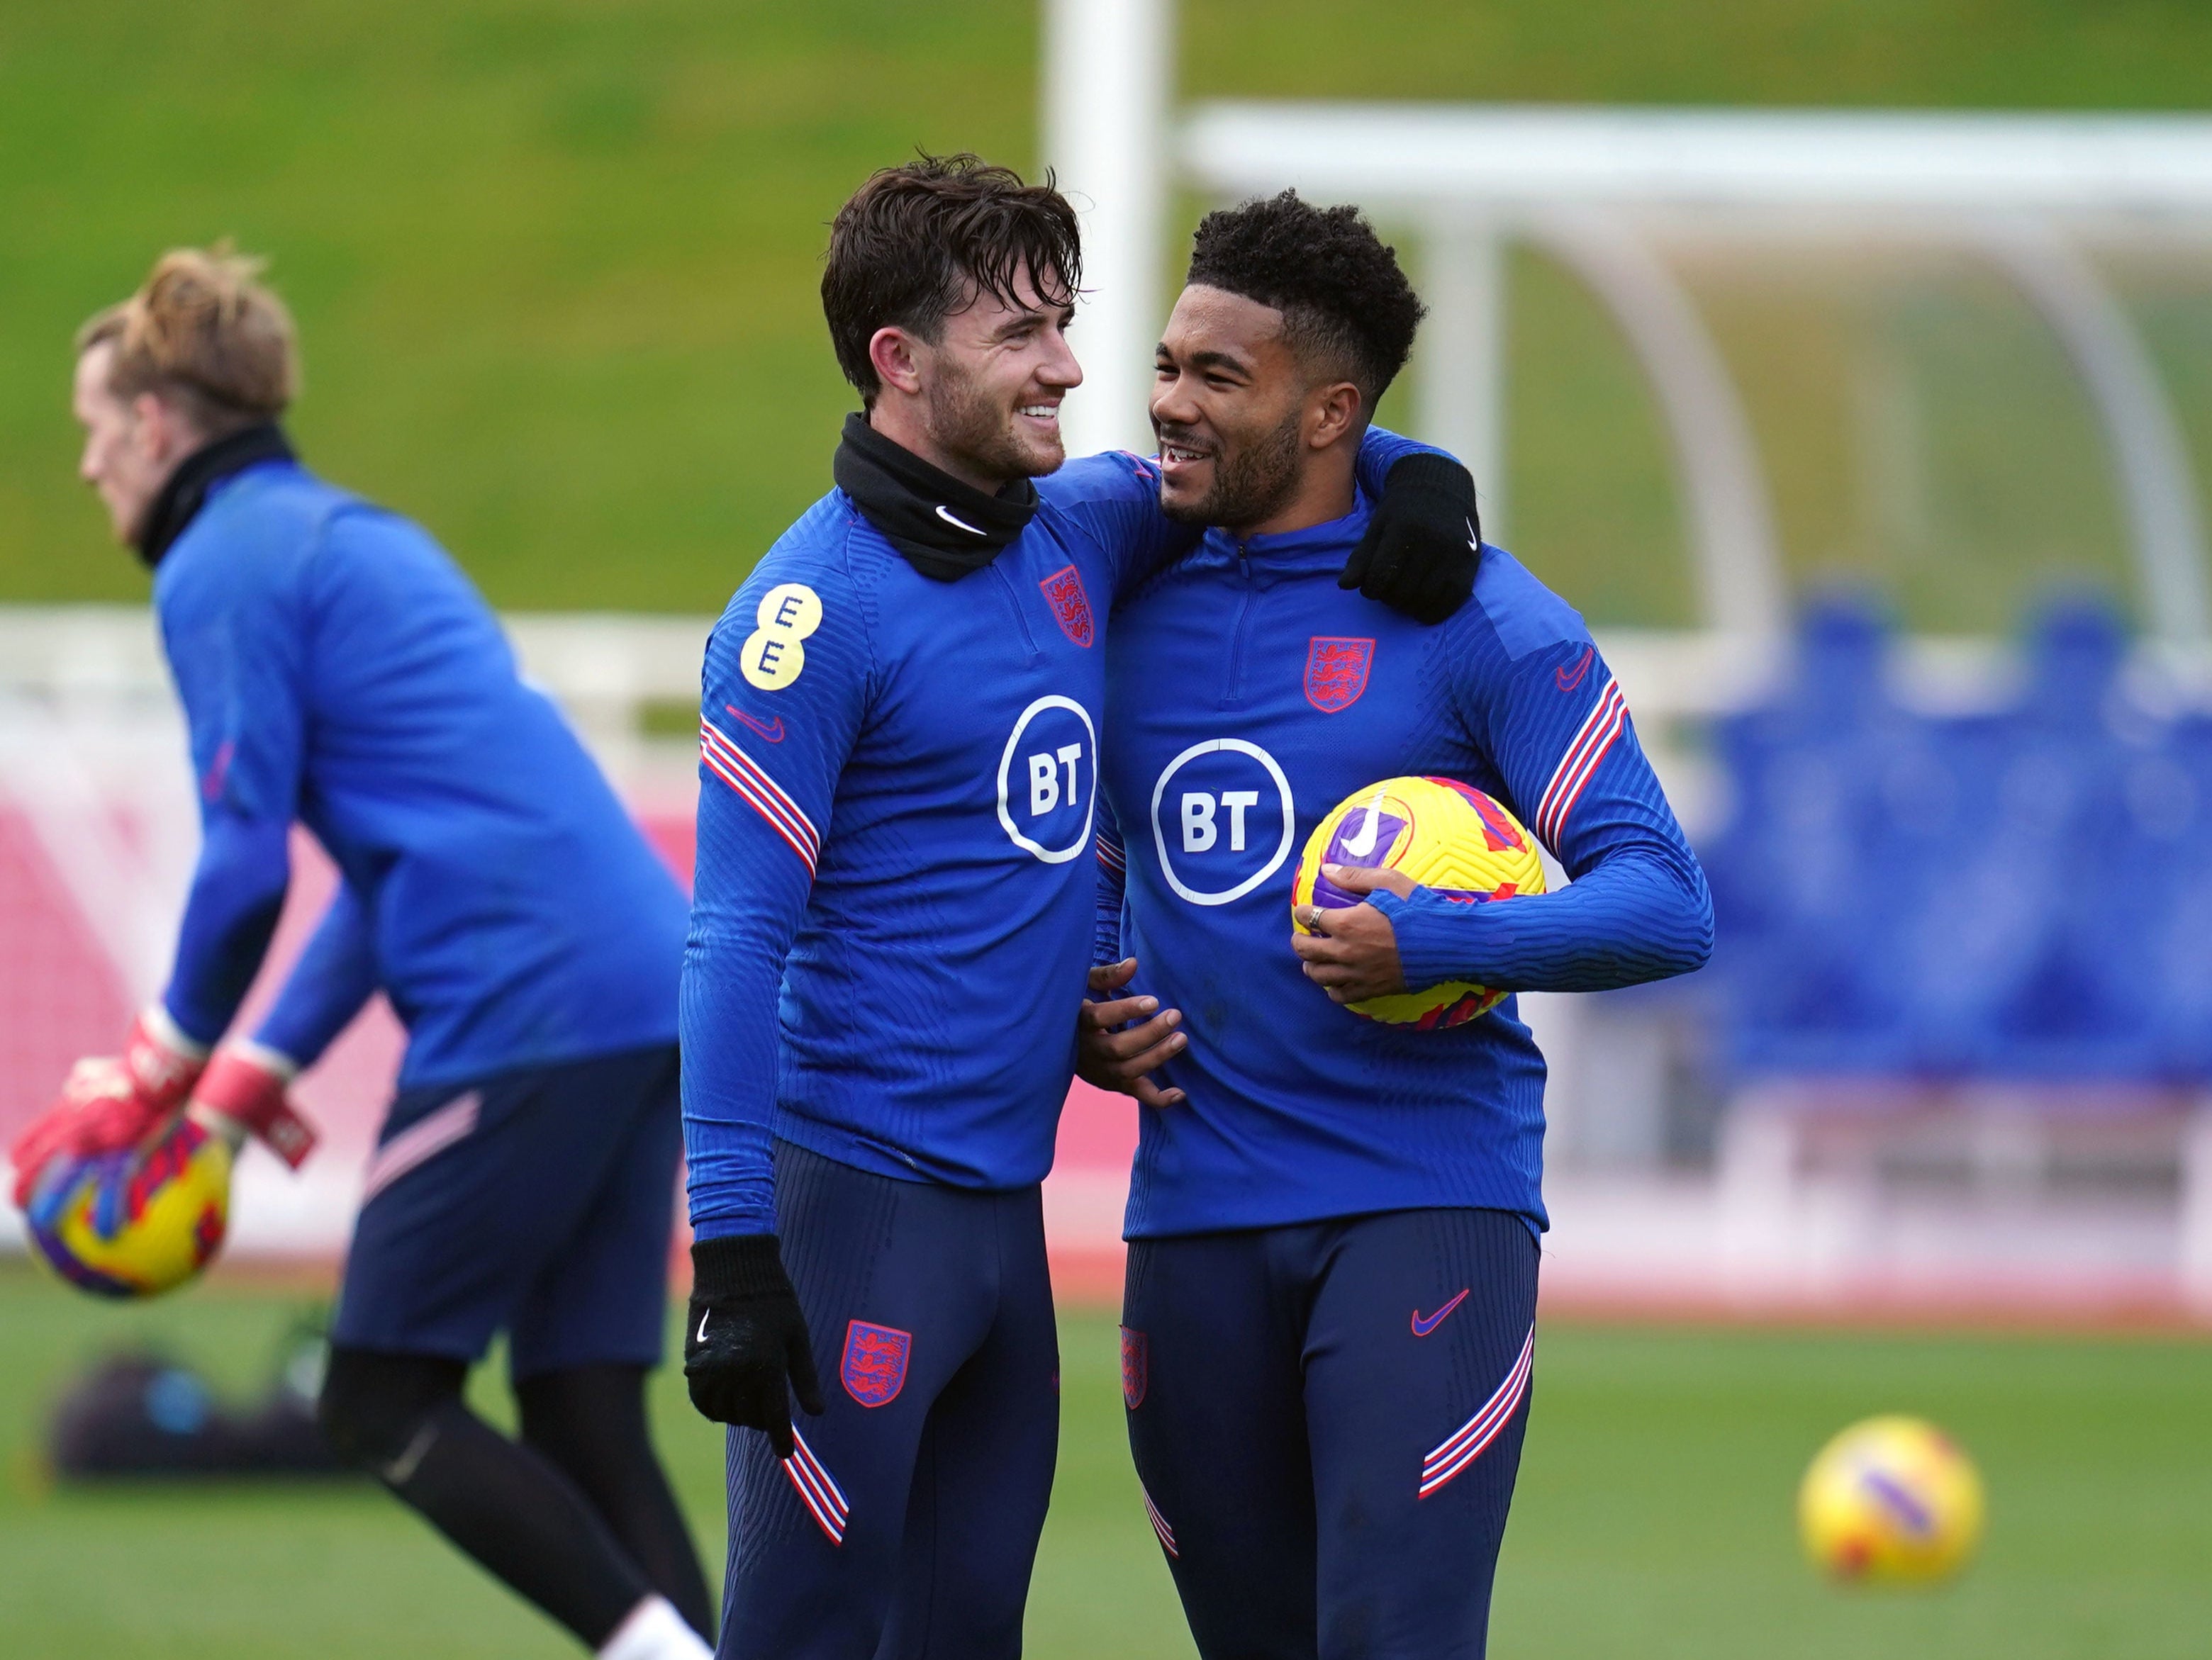 Ben Chilwell, left, in England training with Chelsea teammate Reece James